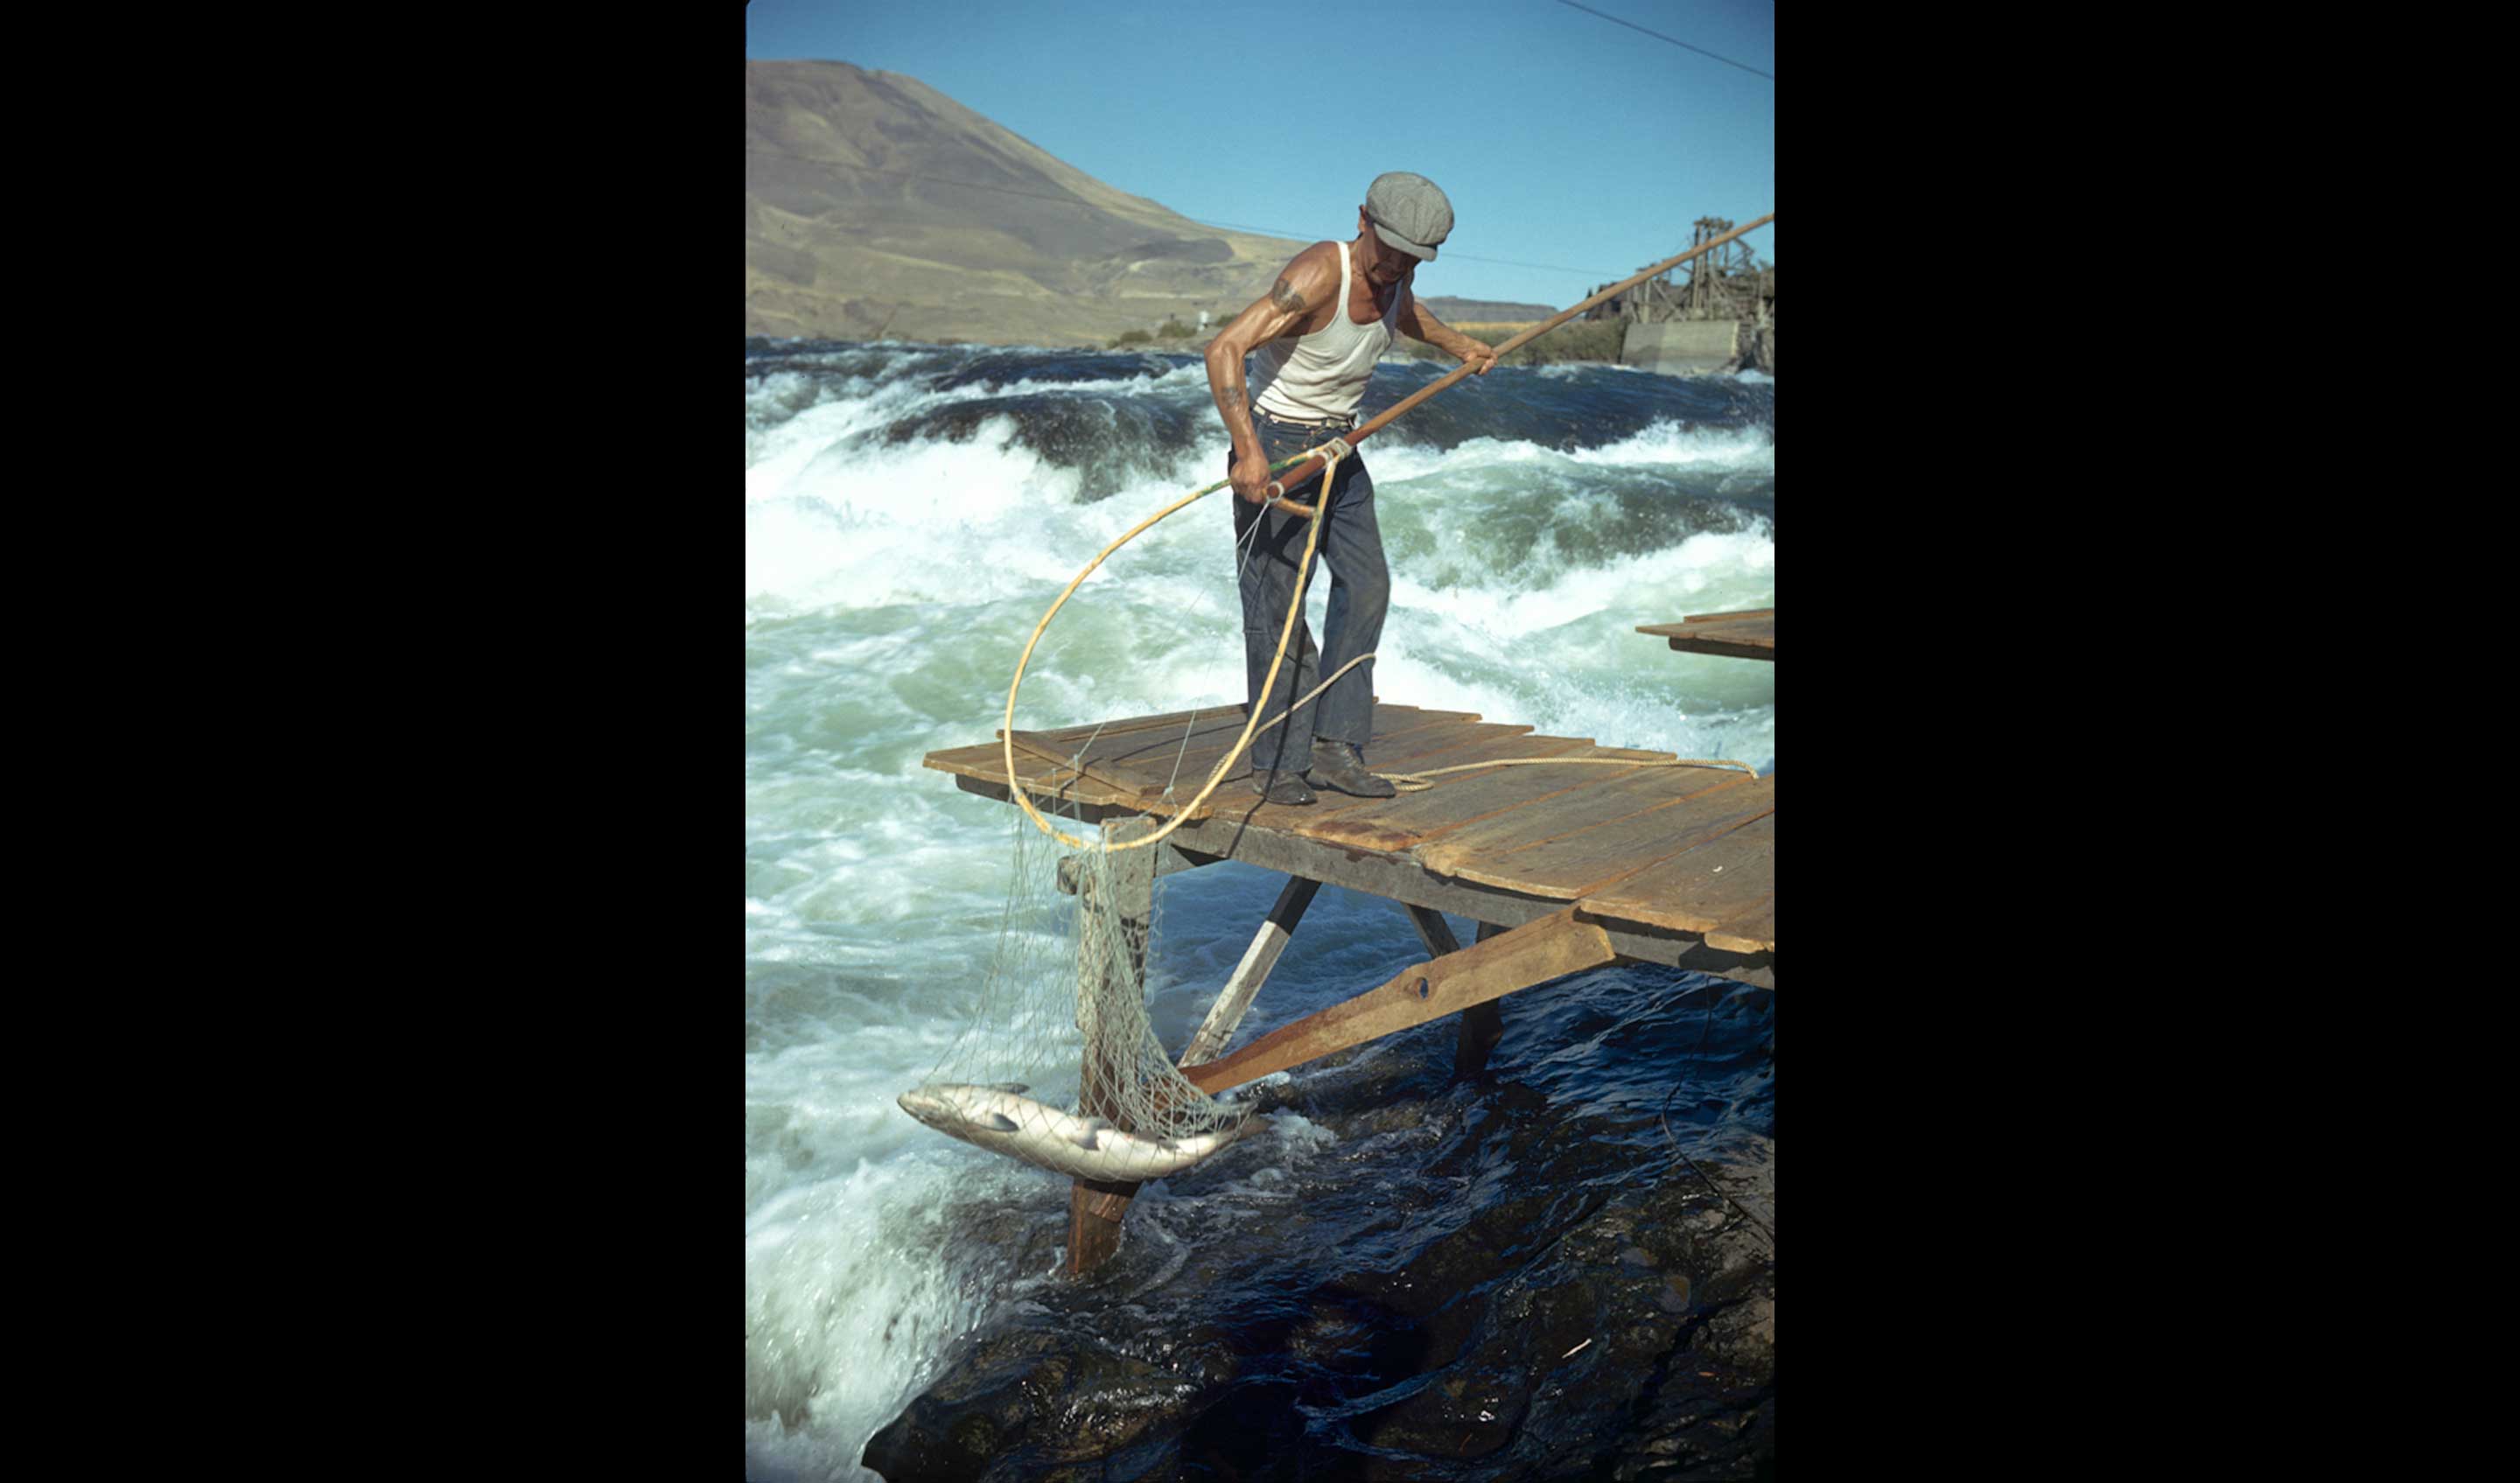 Gallery: Fishing at Celilo Falls - Confluence Project